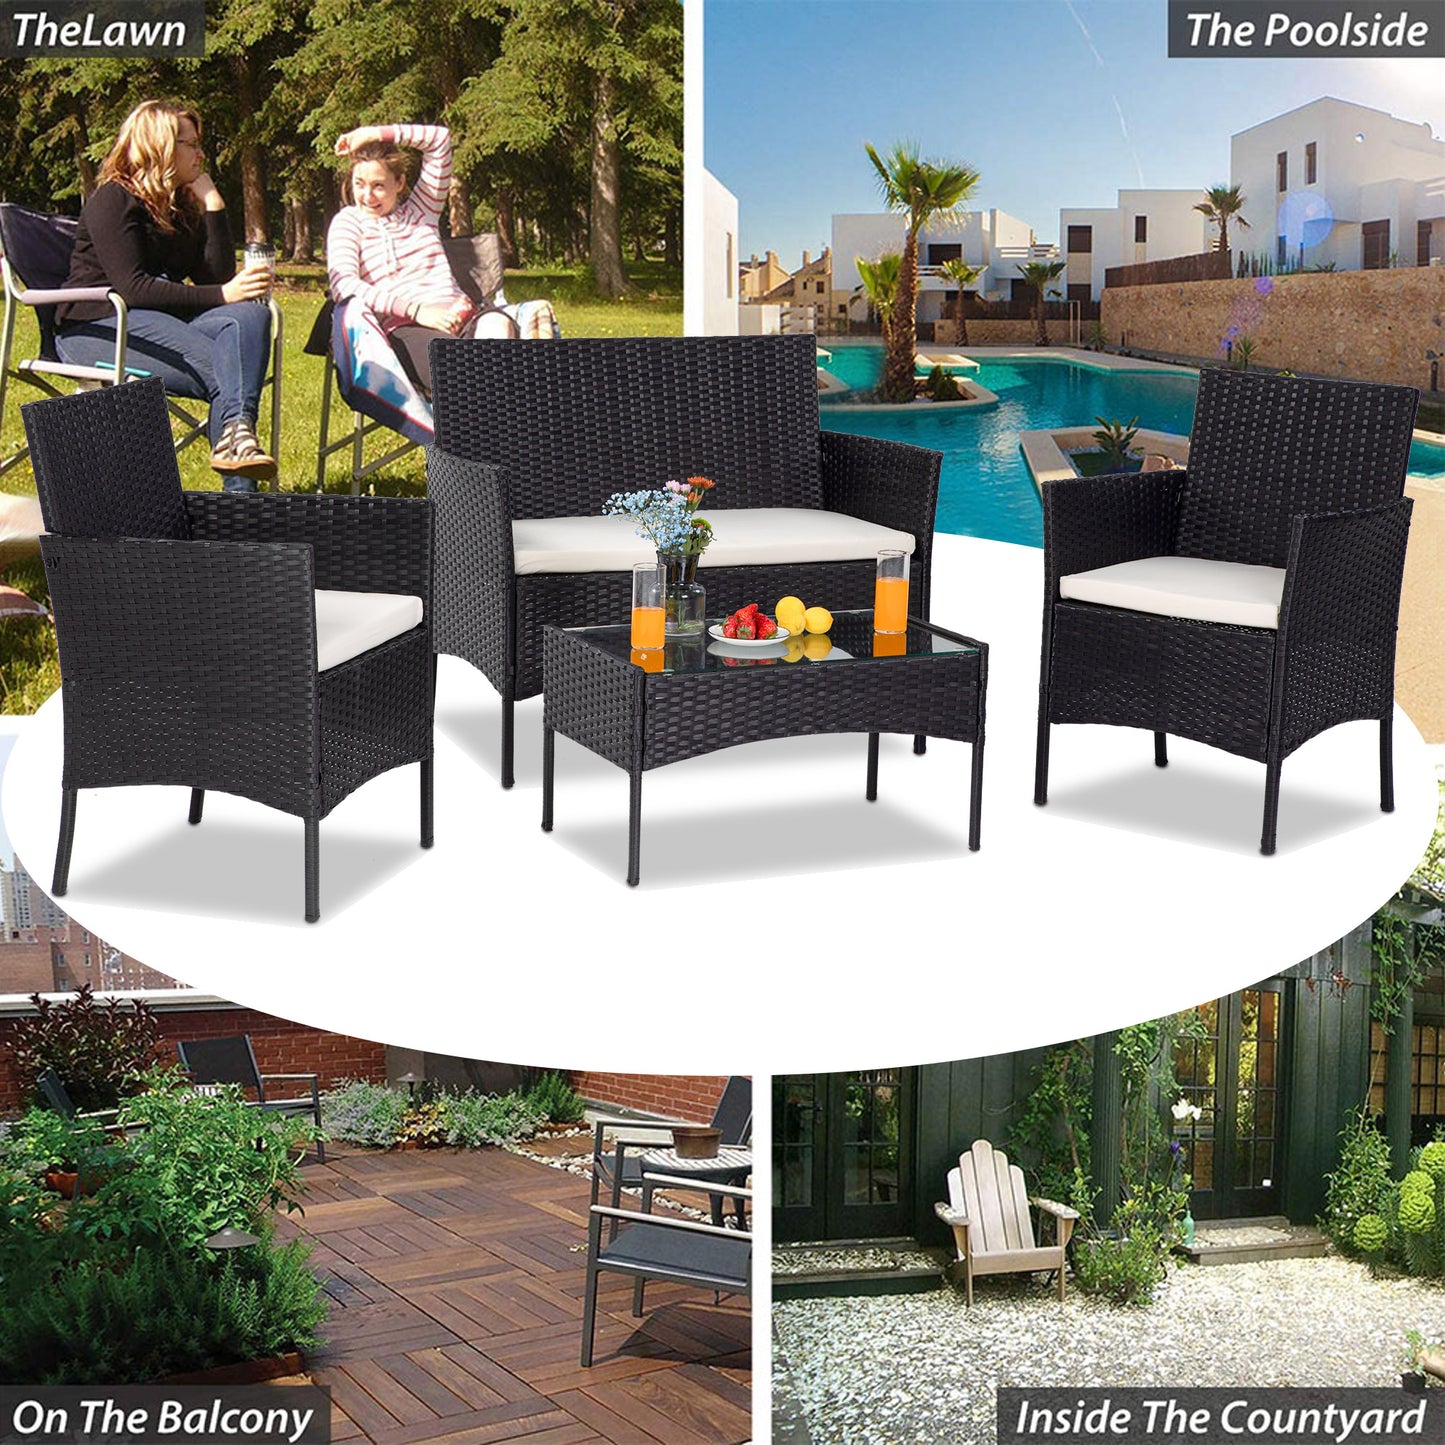 4-Piece All-Weather Wicker Patio Conversation Sets, Outdoor Furniture Sofa Couch Dining Set with Table, Chairs, Loveseat, Cushioned Seats for Garden, Lawn, Backyard, Front Porch, Brown